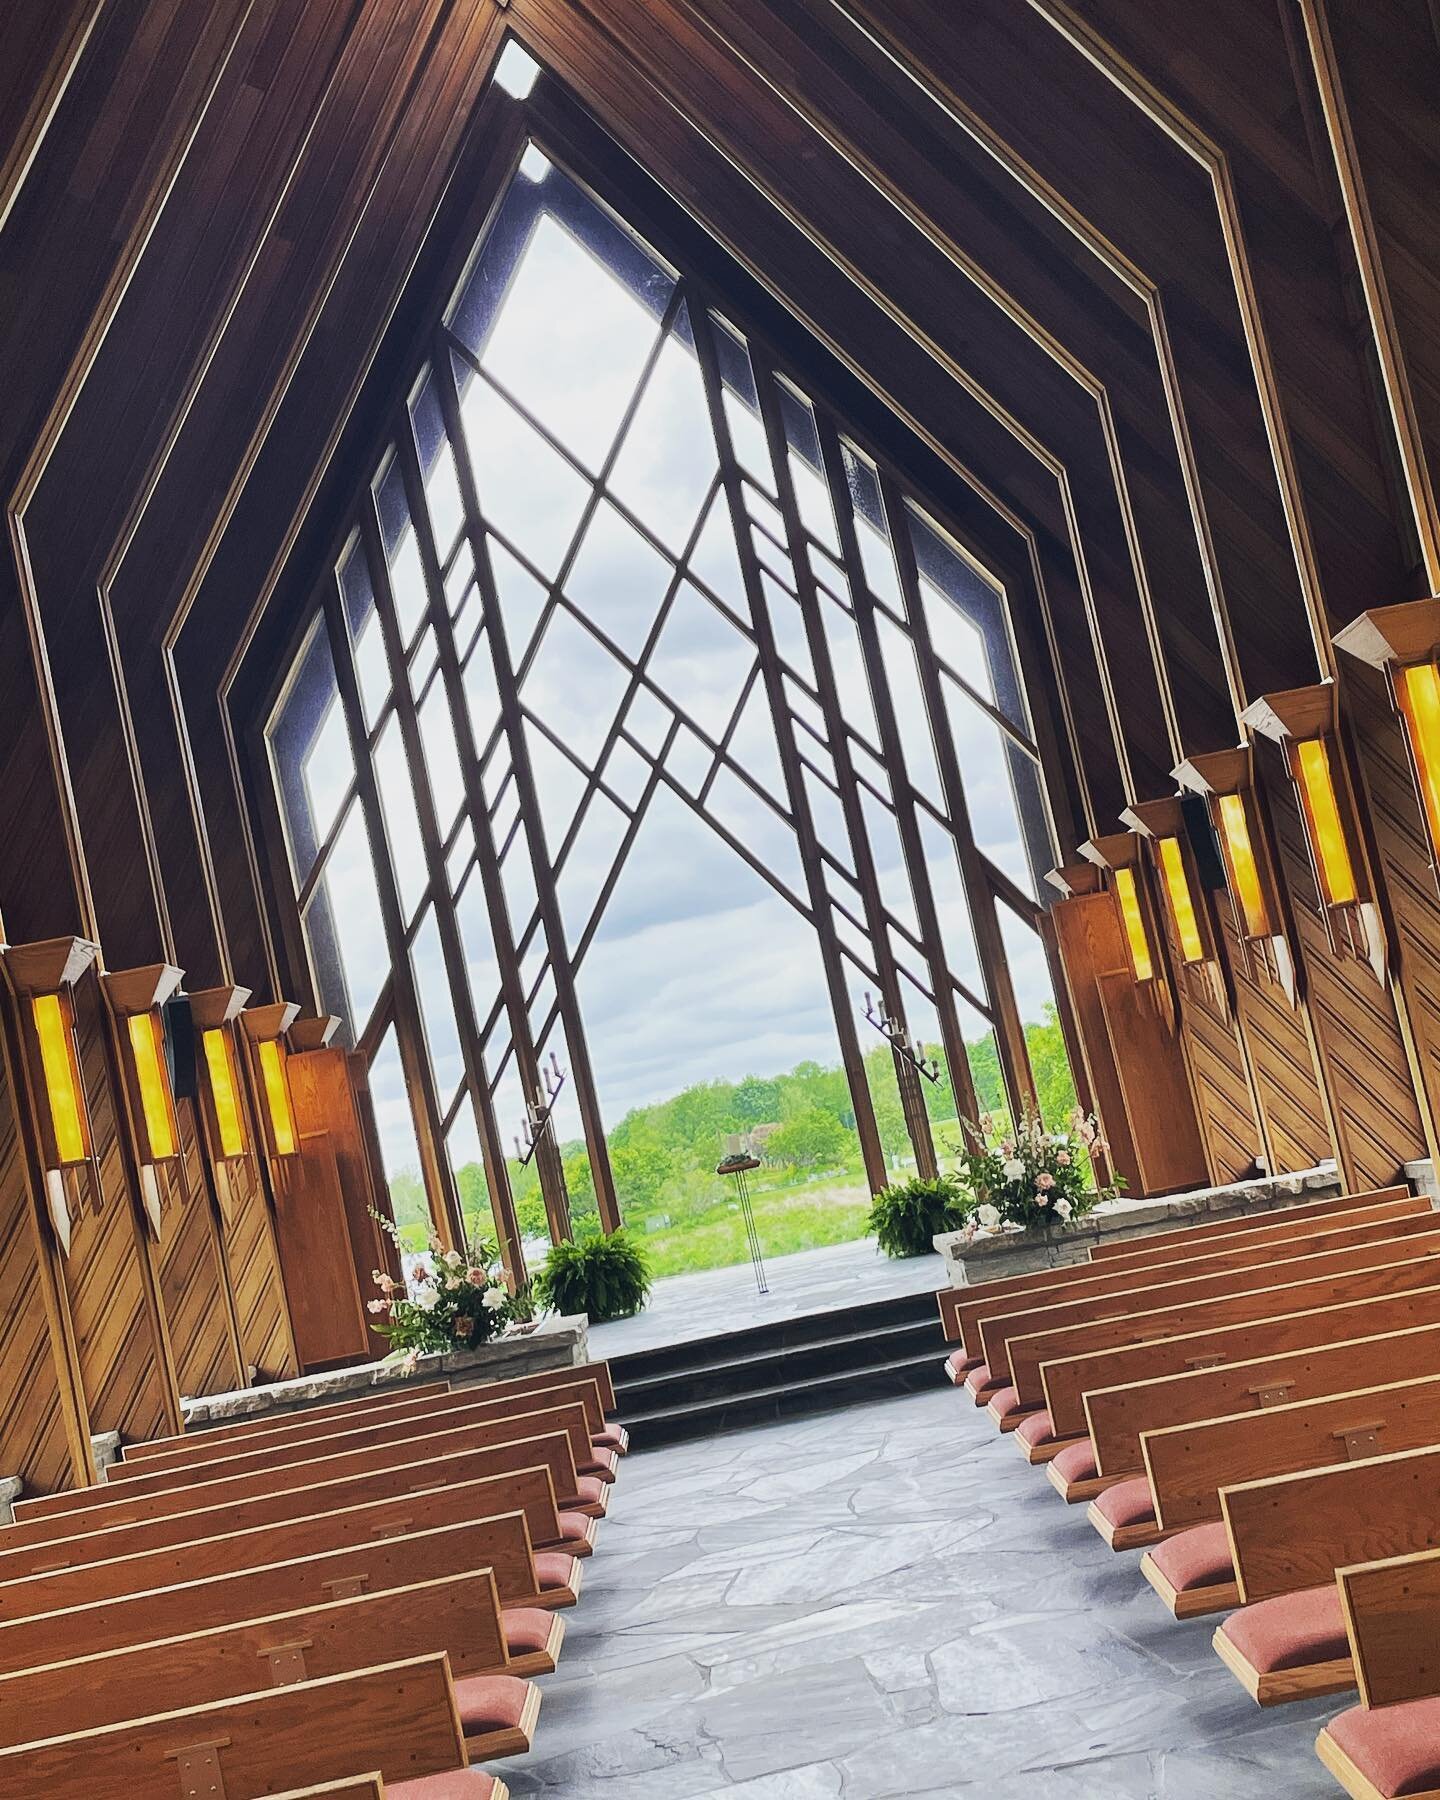 Today&rsquo;s wedding is at the chapel at Powell Gardens. Swipe to see the cute kiddos.
.
.
#kcmusicians #kclivemusic #kcevents #kcweddings #kansascity #kcweddingmusic #cocktailmusic #cocktailhour #weddingtrio #classicalmusic #modernmusic #violin #vi